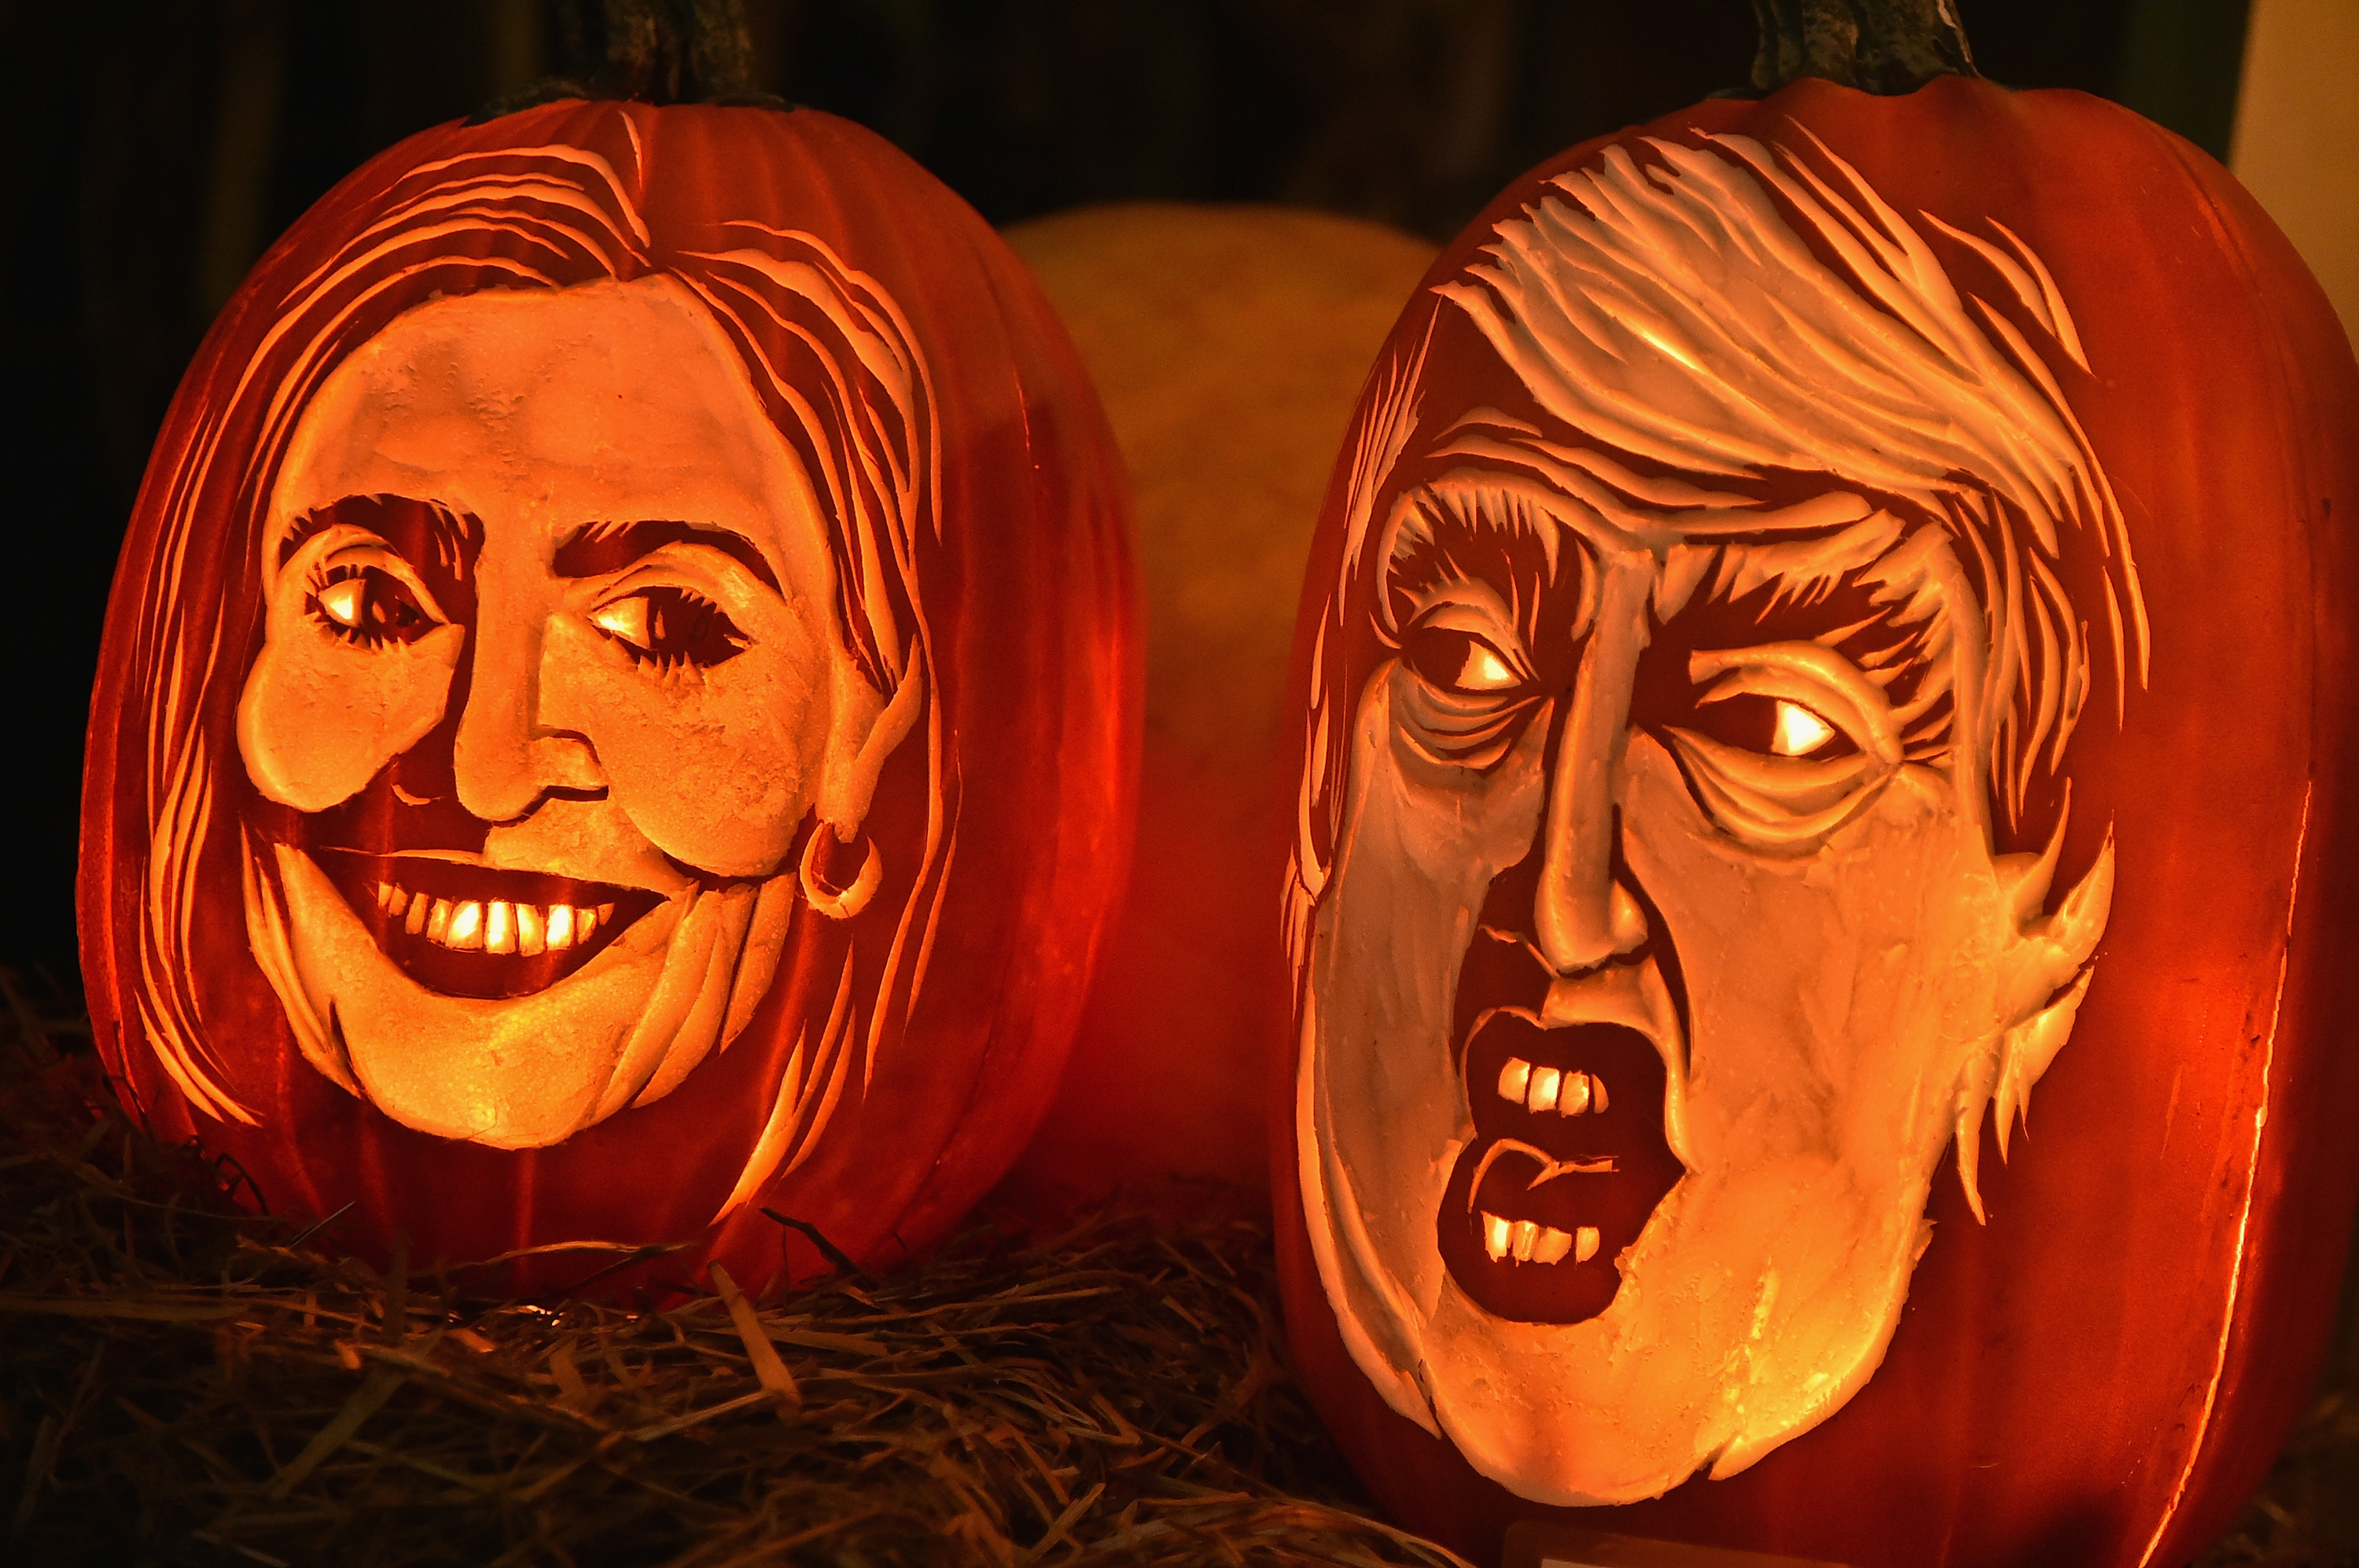 Master Carver Hugh McMahon creates giant Donald Trump and Hillary Clinton pumpkins at Chelsea Market this October in New York City. (Photo by Theo Wargo | Getty Images)